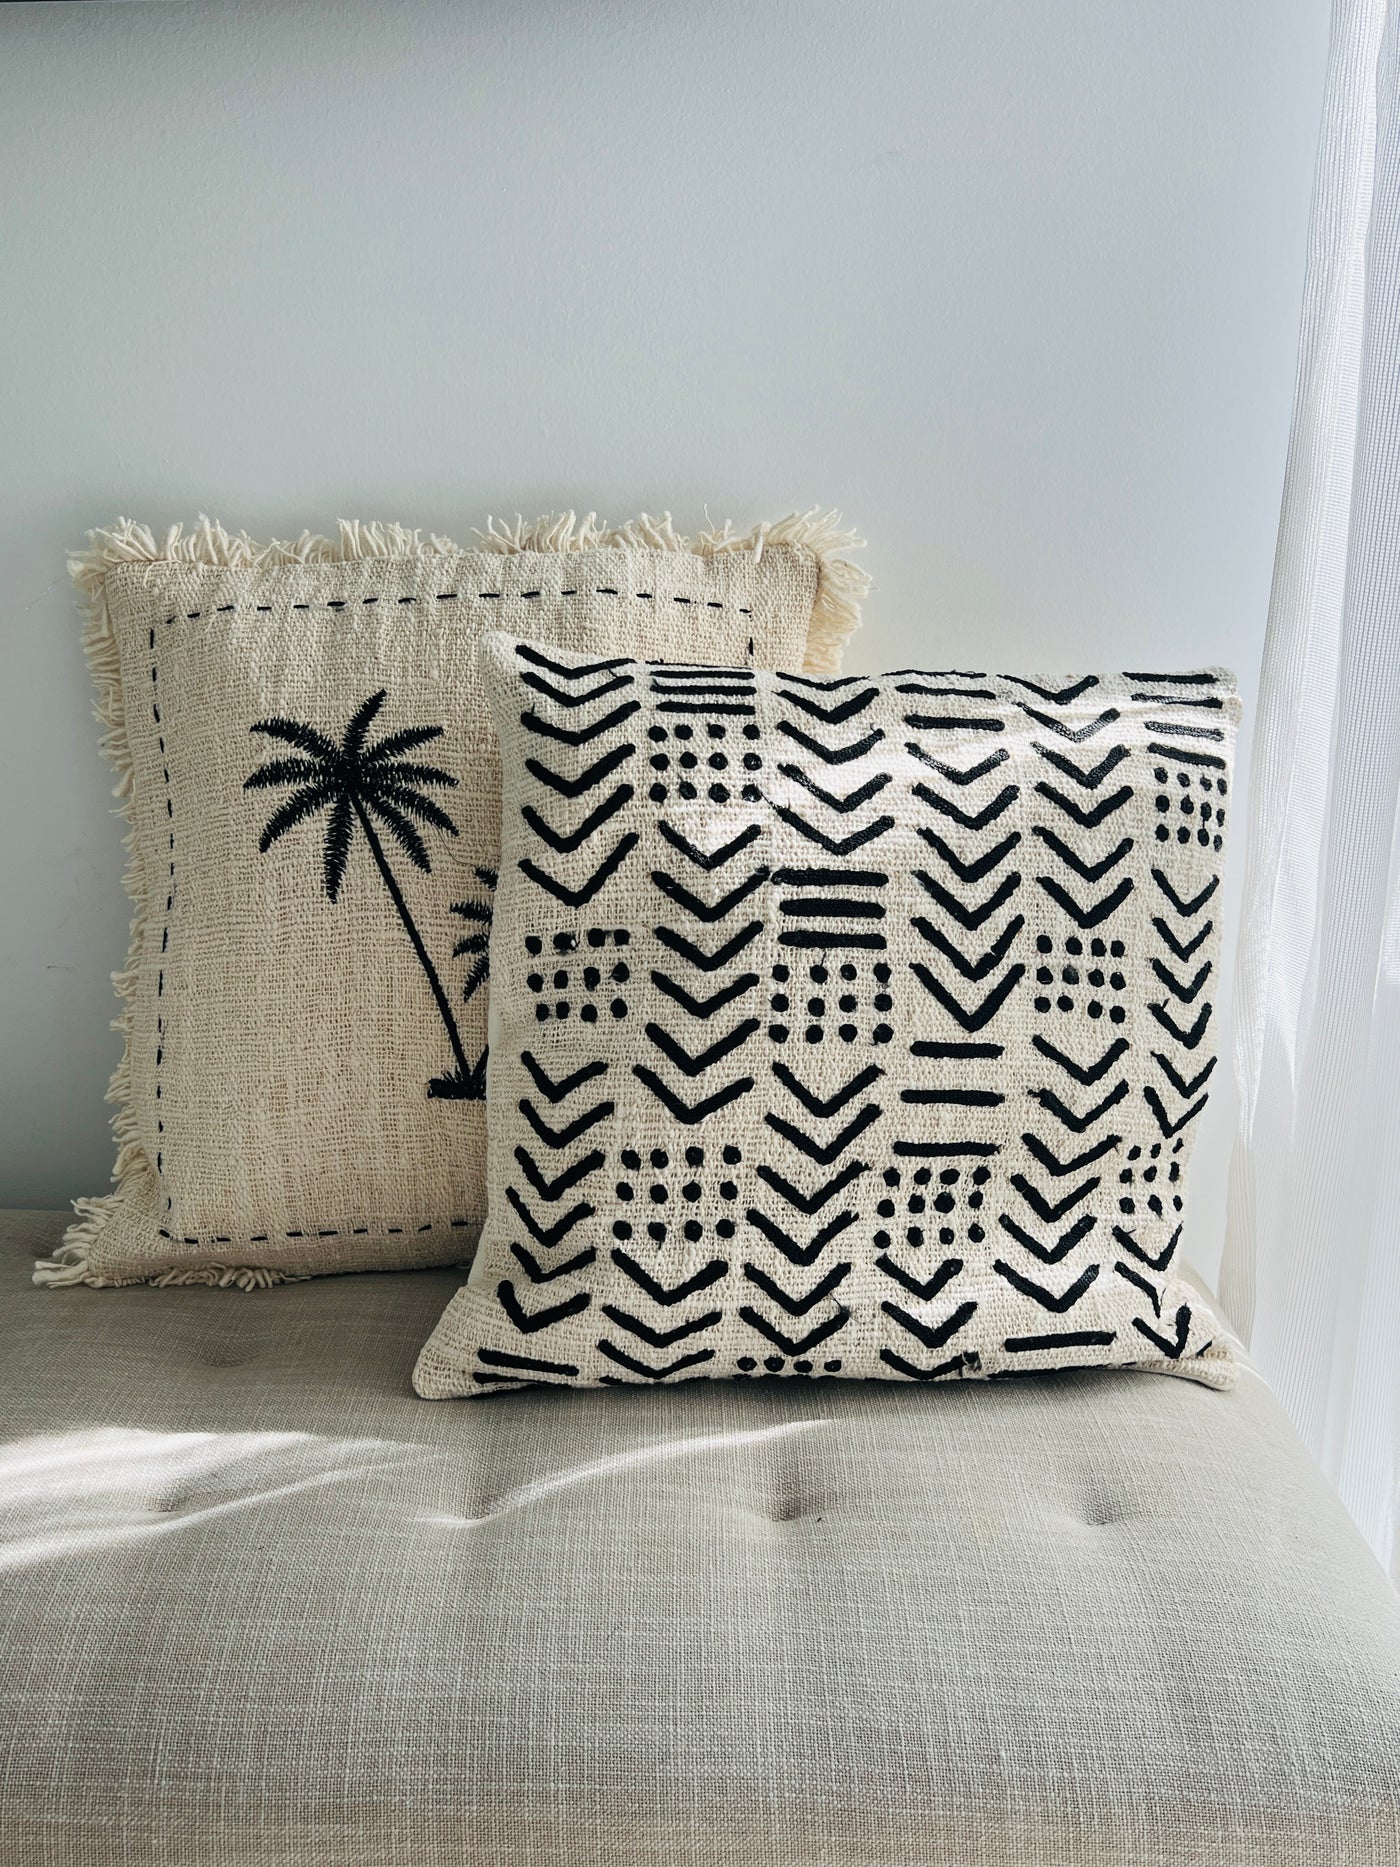 Hand made cotton aztec cushions.